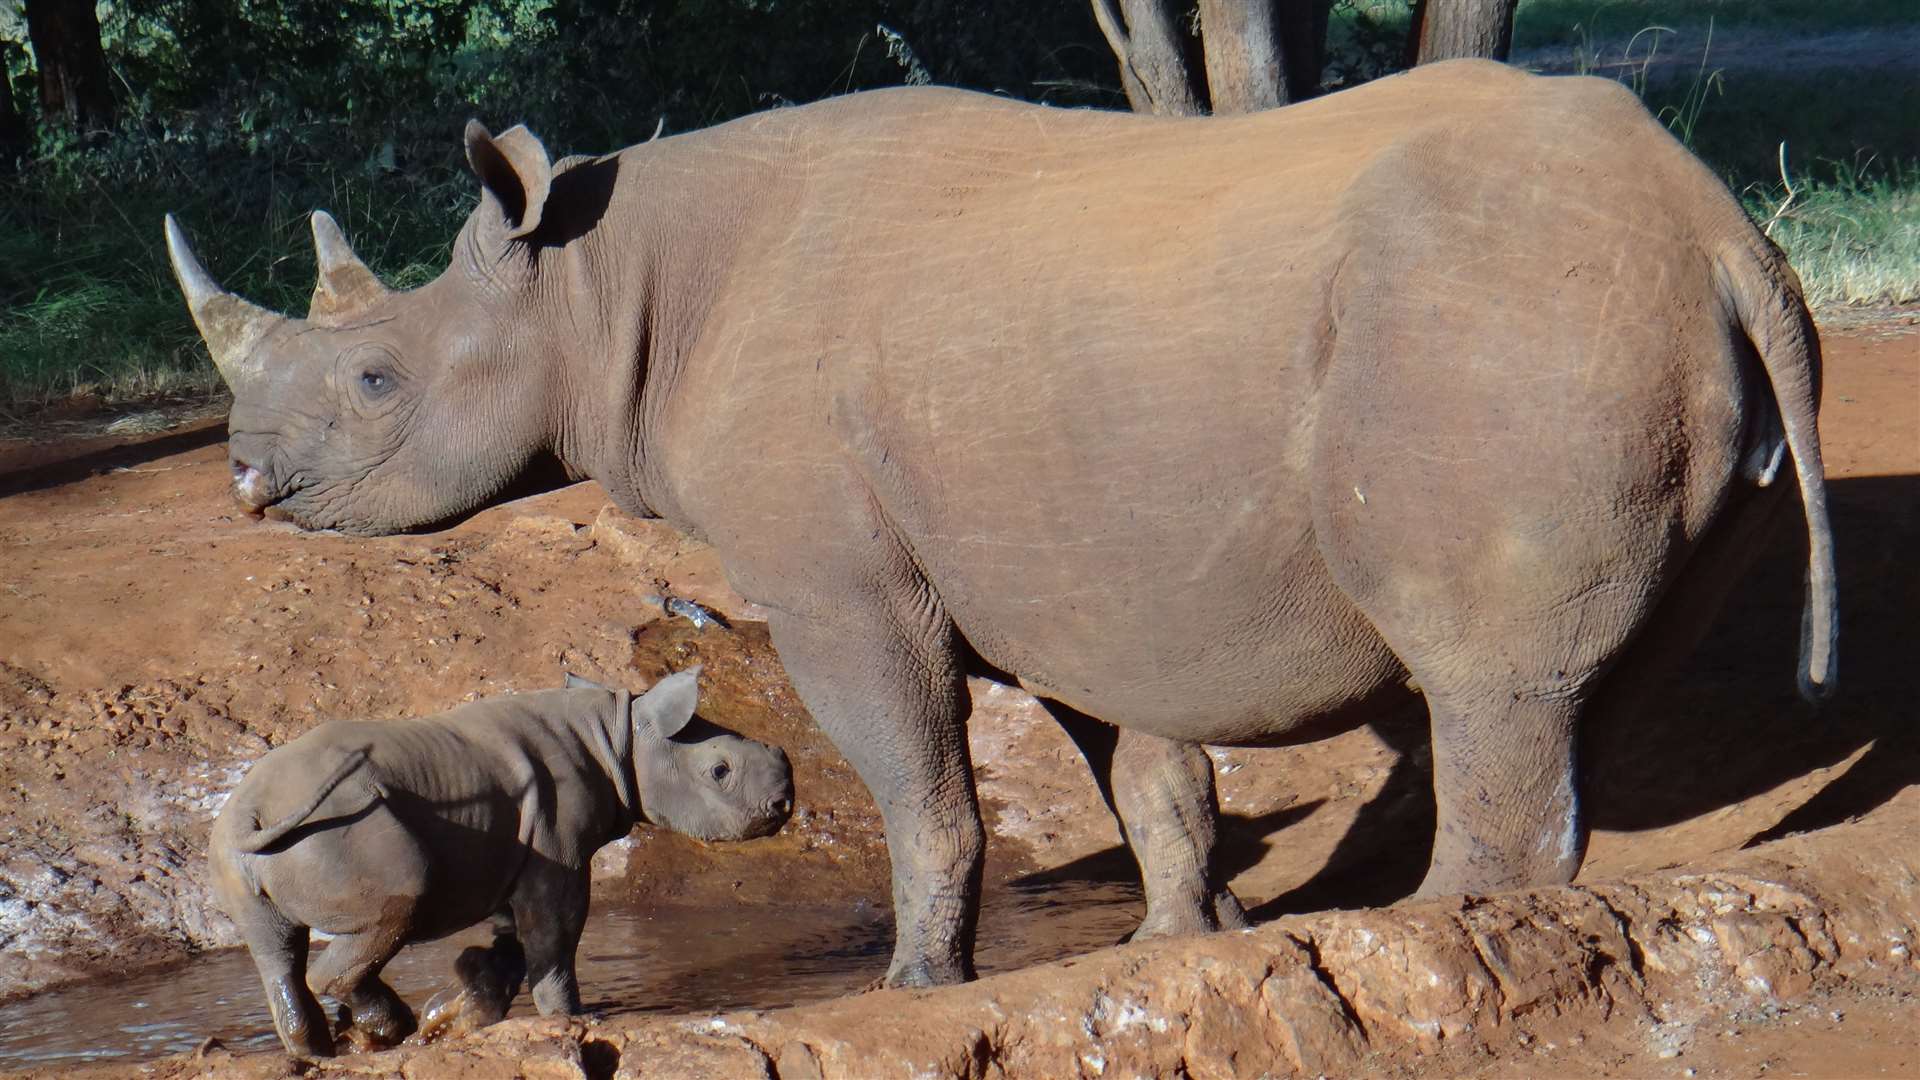 The Aspinall Foundation has previously returned rhinos to the wild